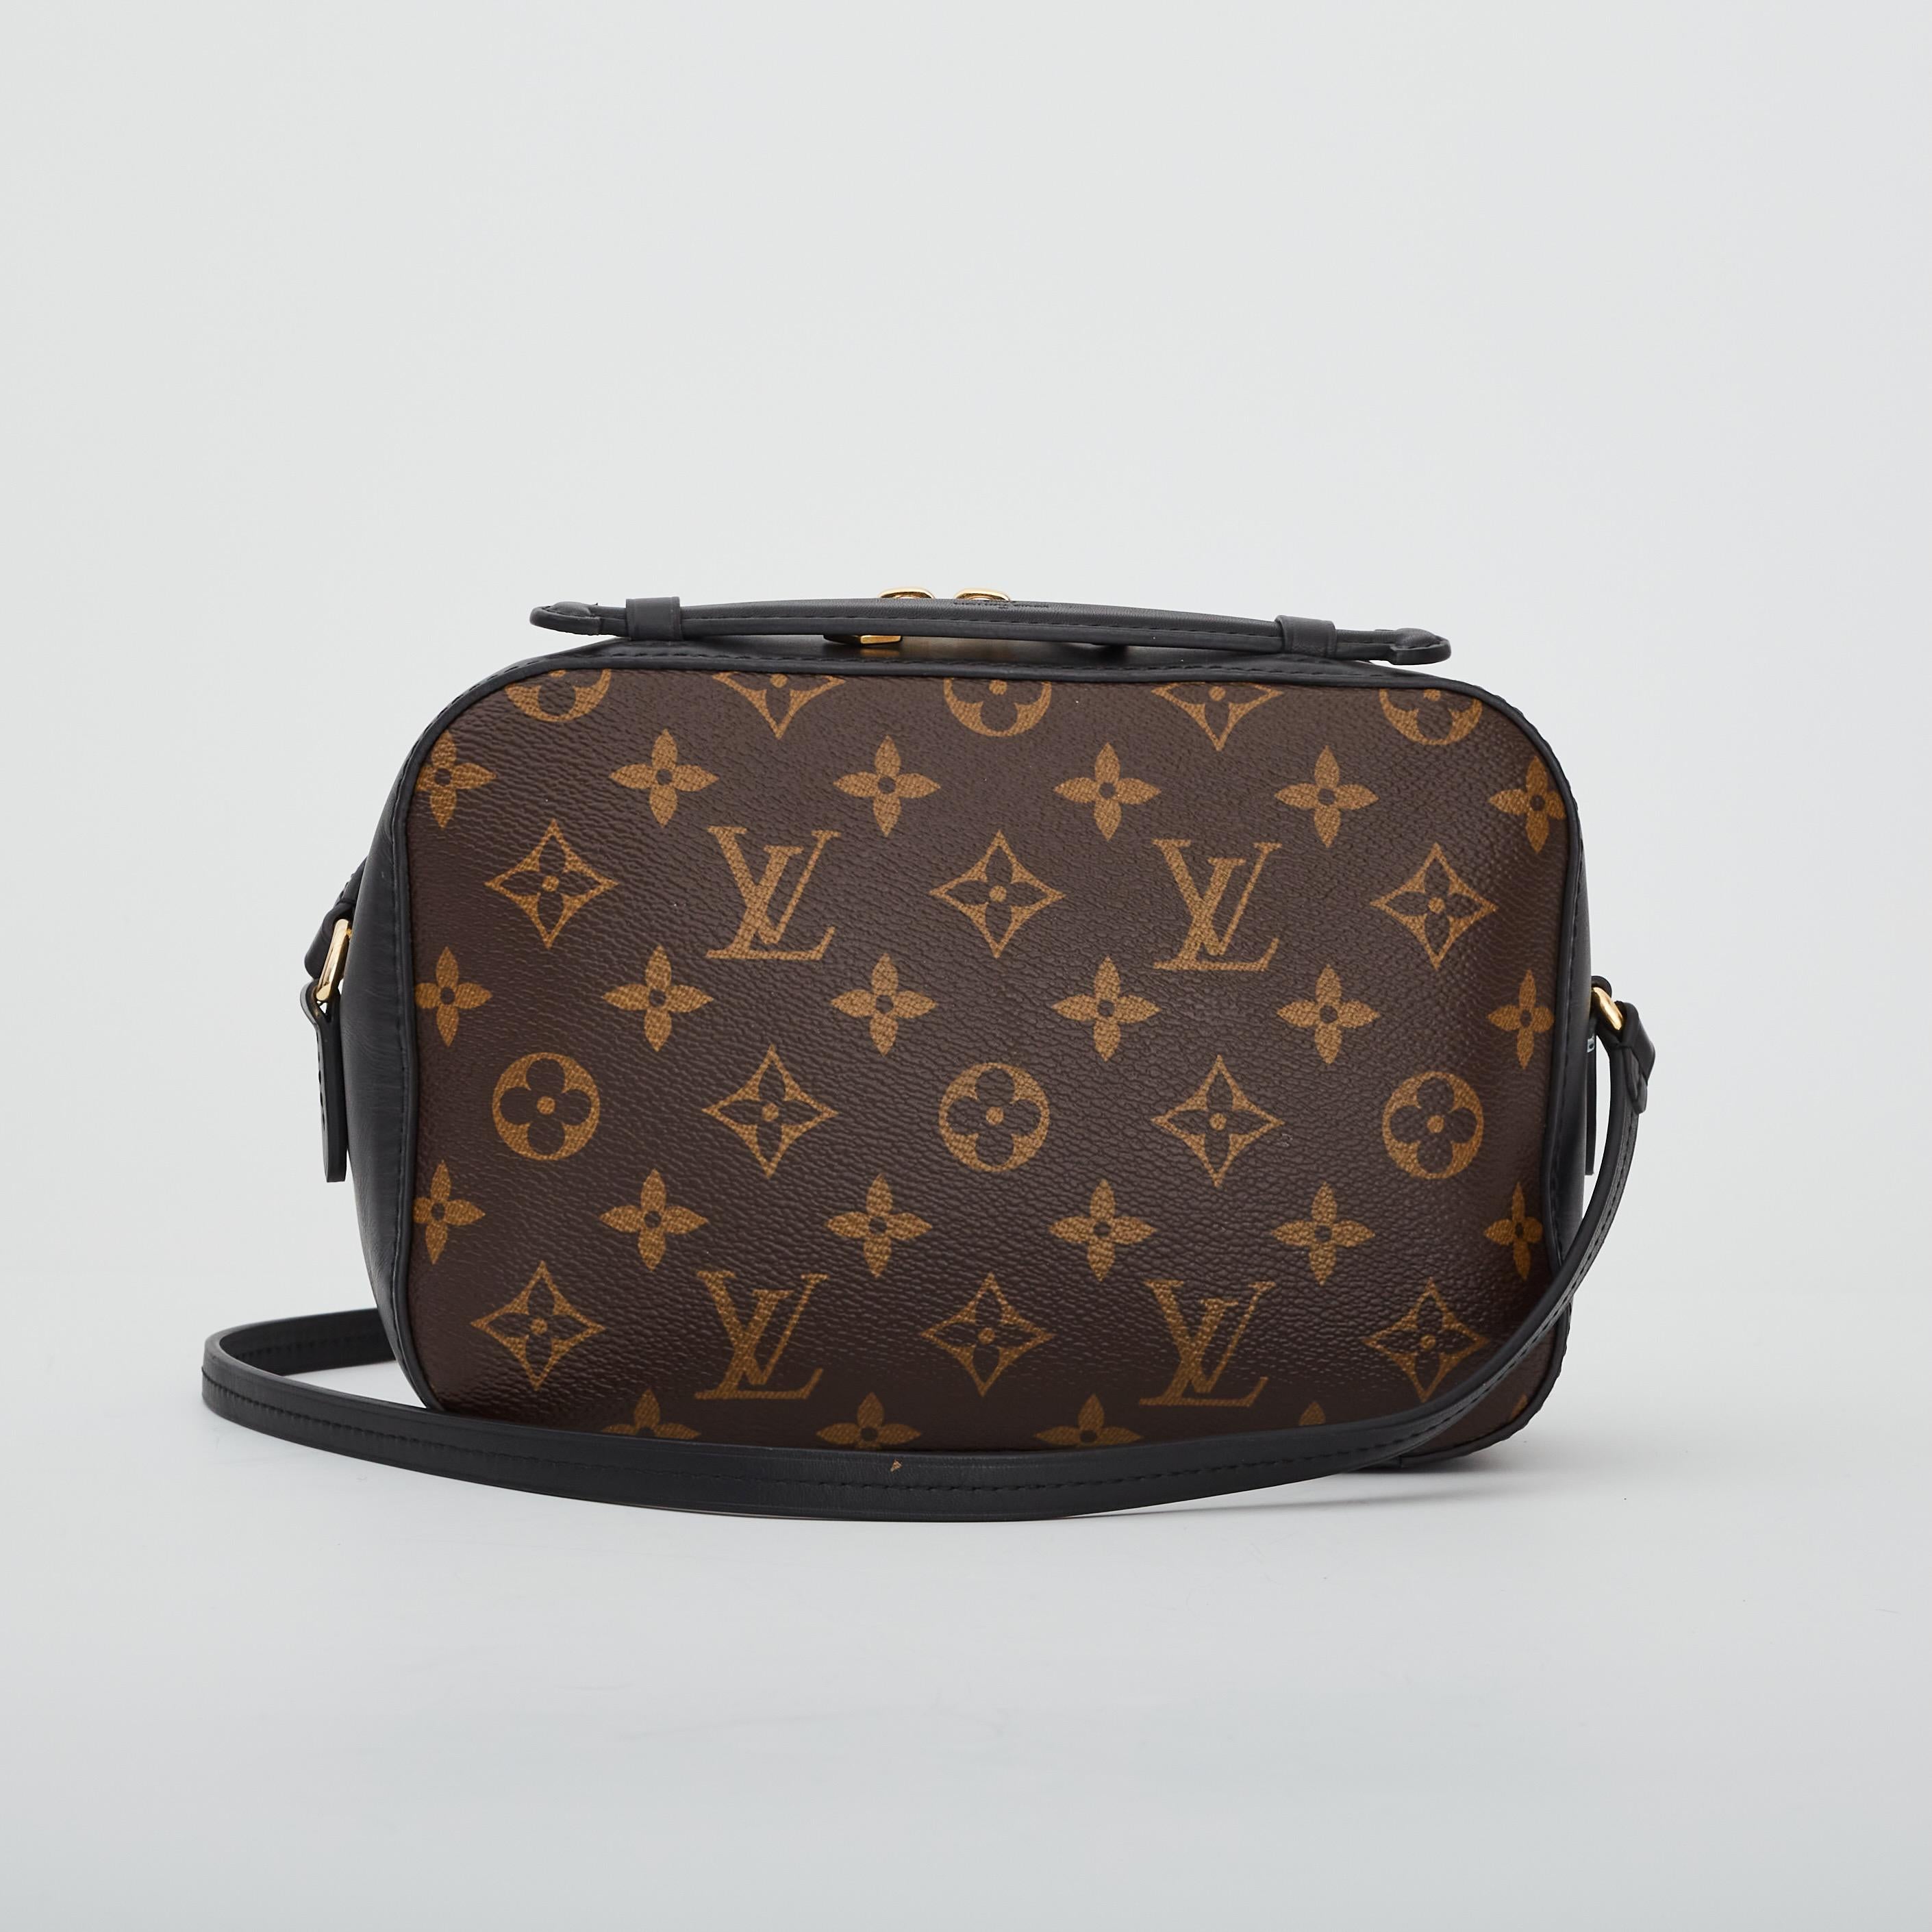 This Saintonge crossbody bag is from the house of Louis Vuitton. It is made from brown monogram coated canvas and is trimmed with black leather. The front of the bag is highlighted with a gold-tone accent attached with leather tassels for some extra